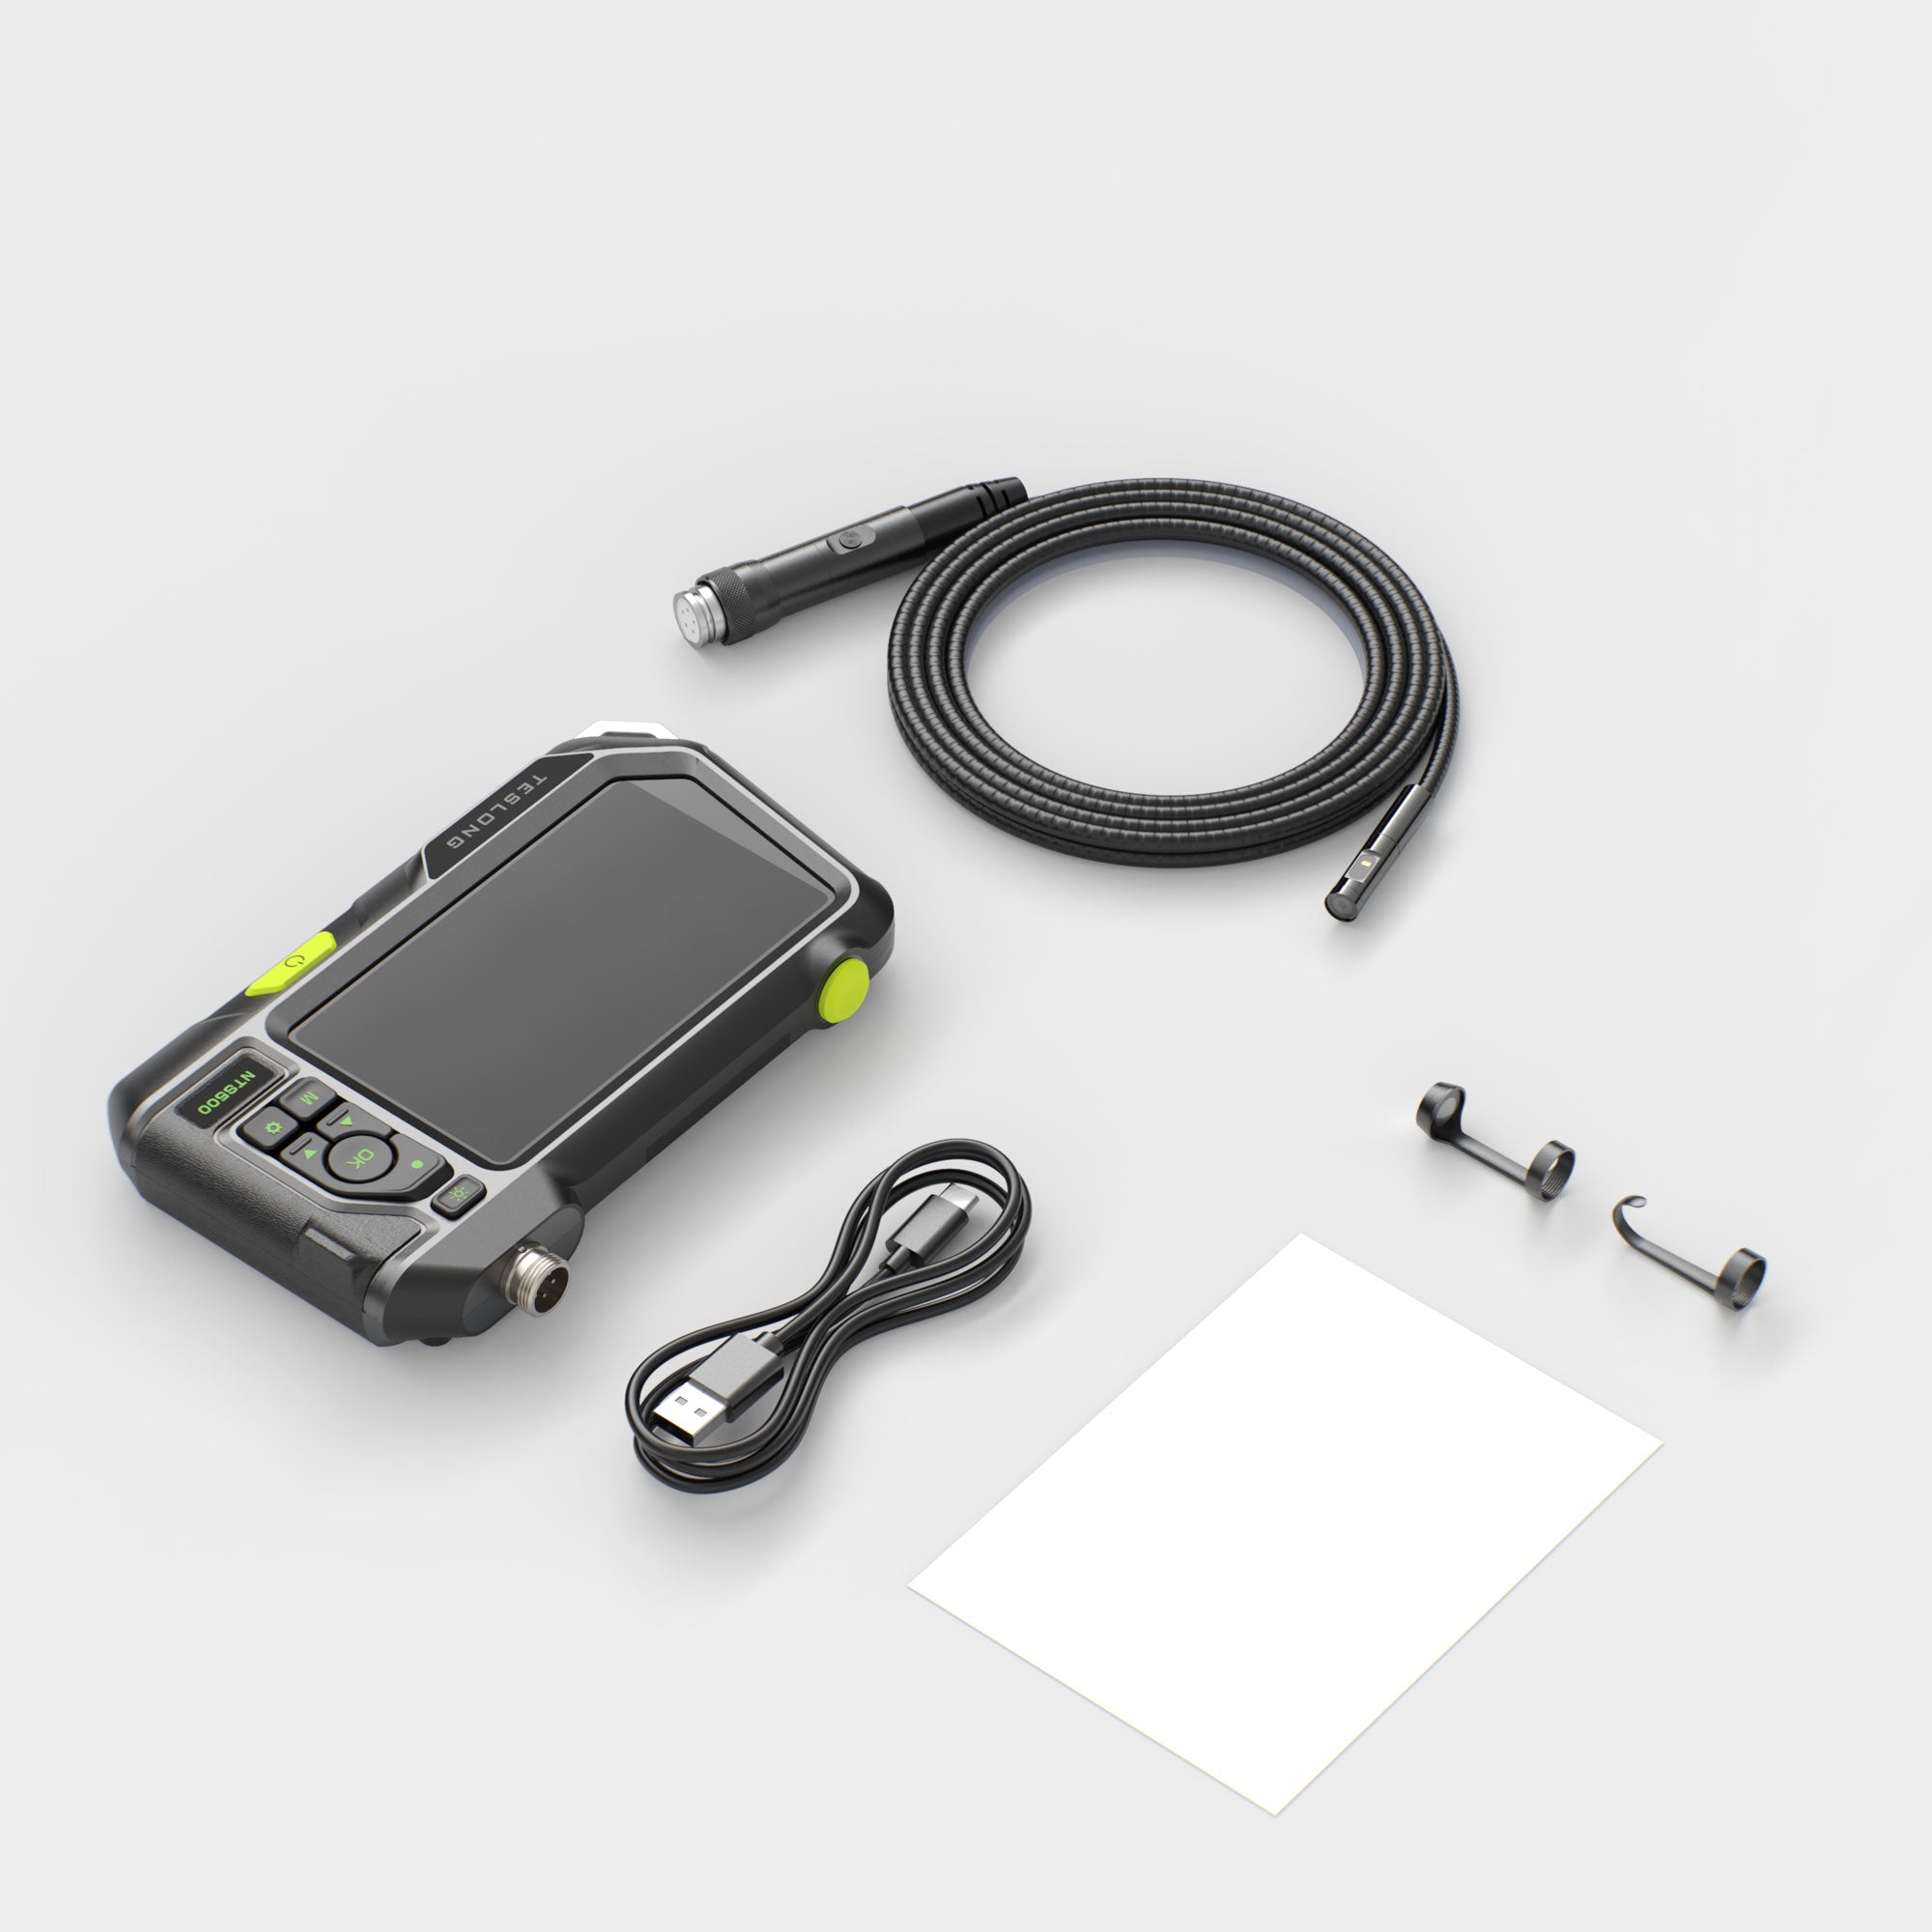 NTS500 Pro Inspection Camera with 5-inch HD Screen